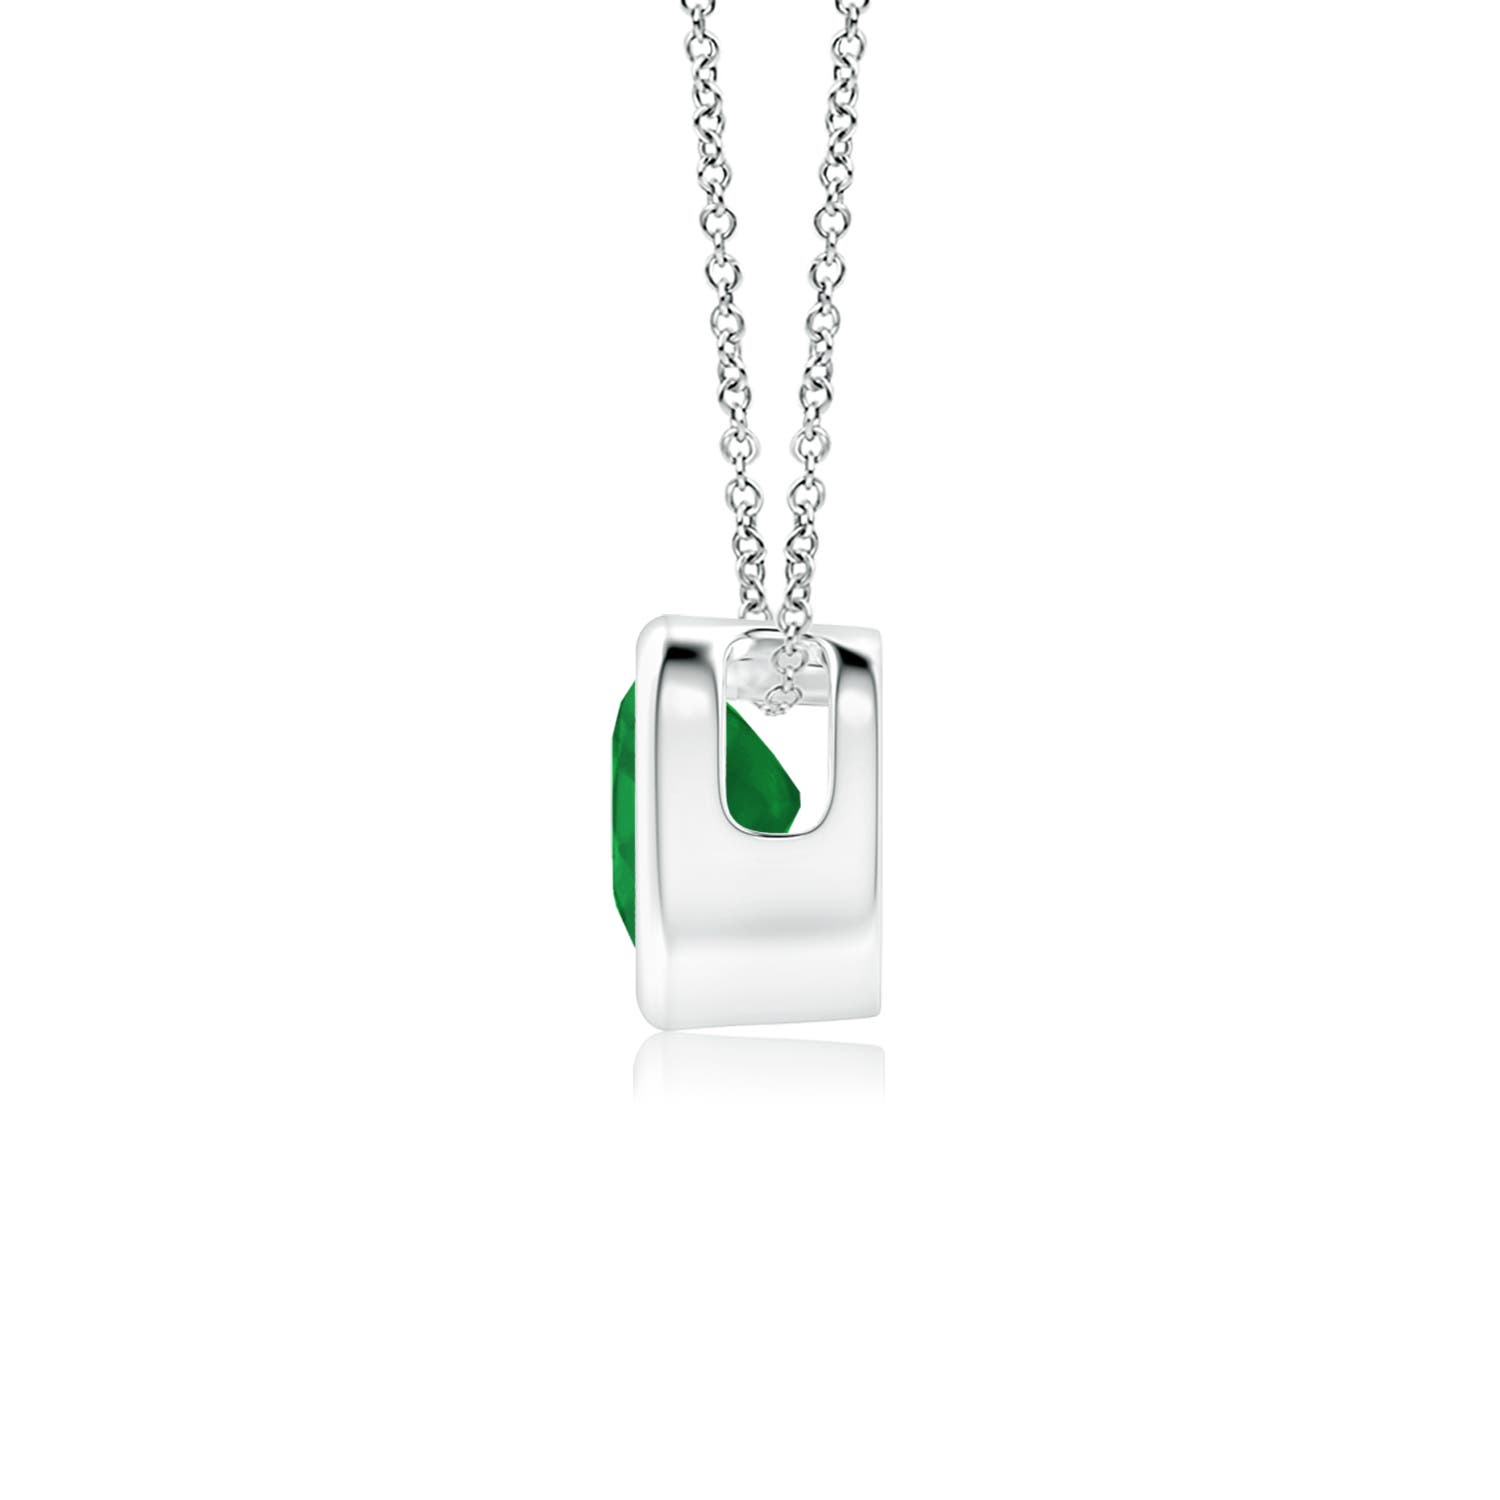 A - Emerald / 0.2 CT / 14 KT White Gold